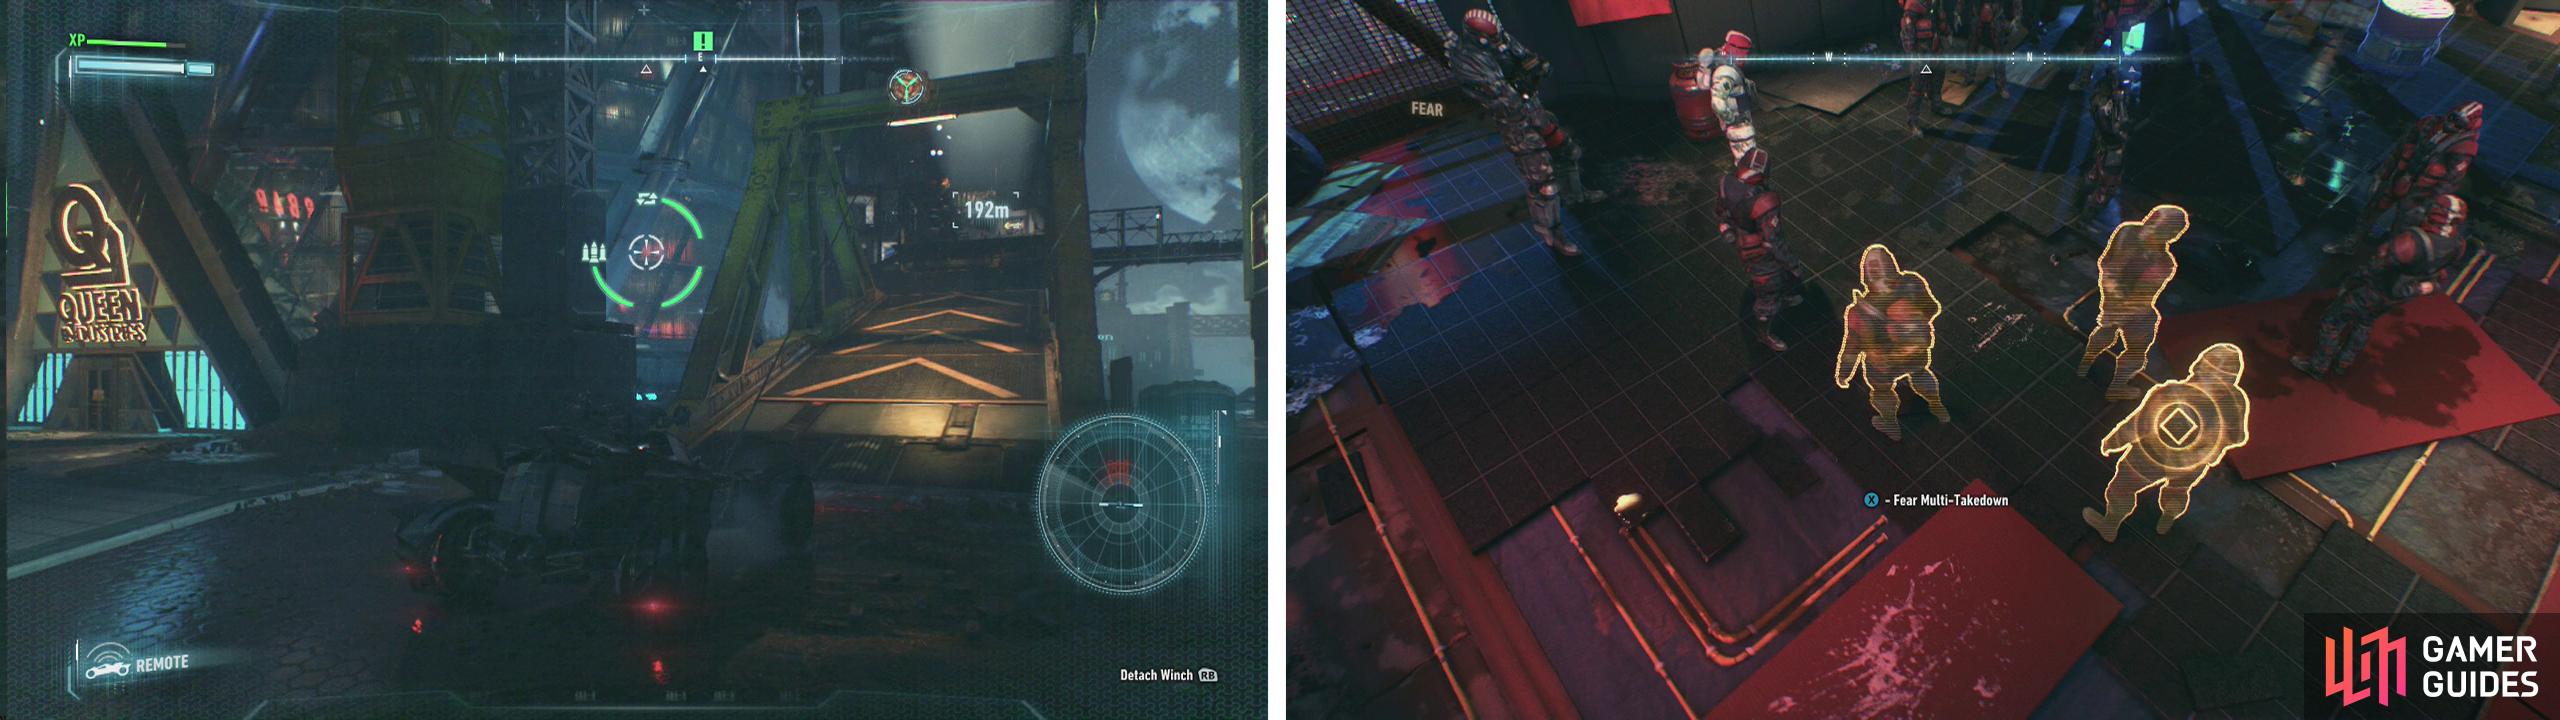 Interact with the ramp in the Batmobile (left). Use a Fear multi-Takedown when the room fills with enemies (right) - try to get a Medic!